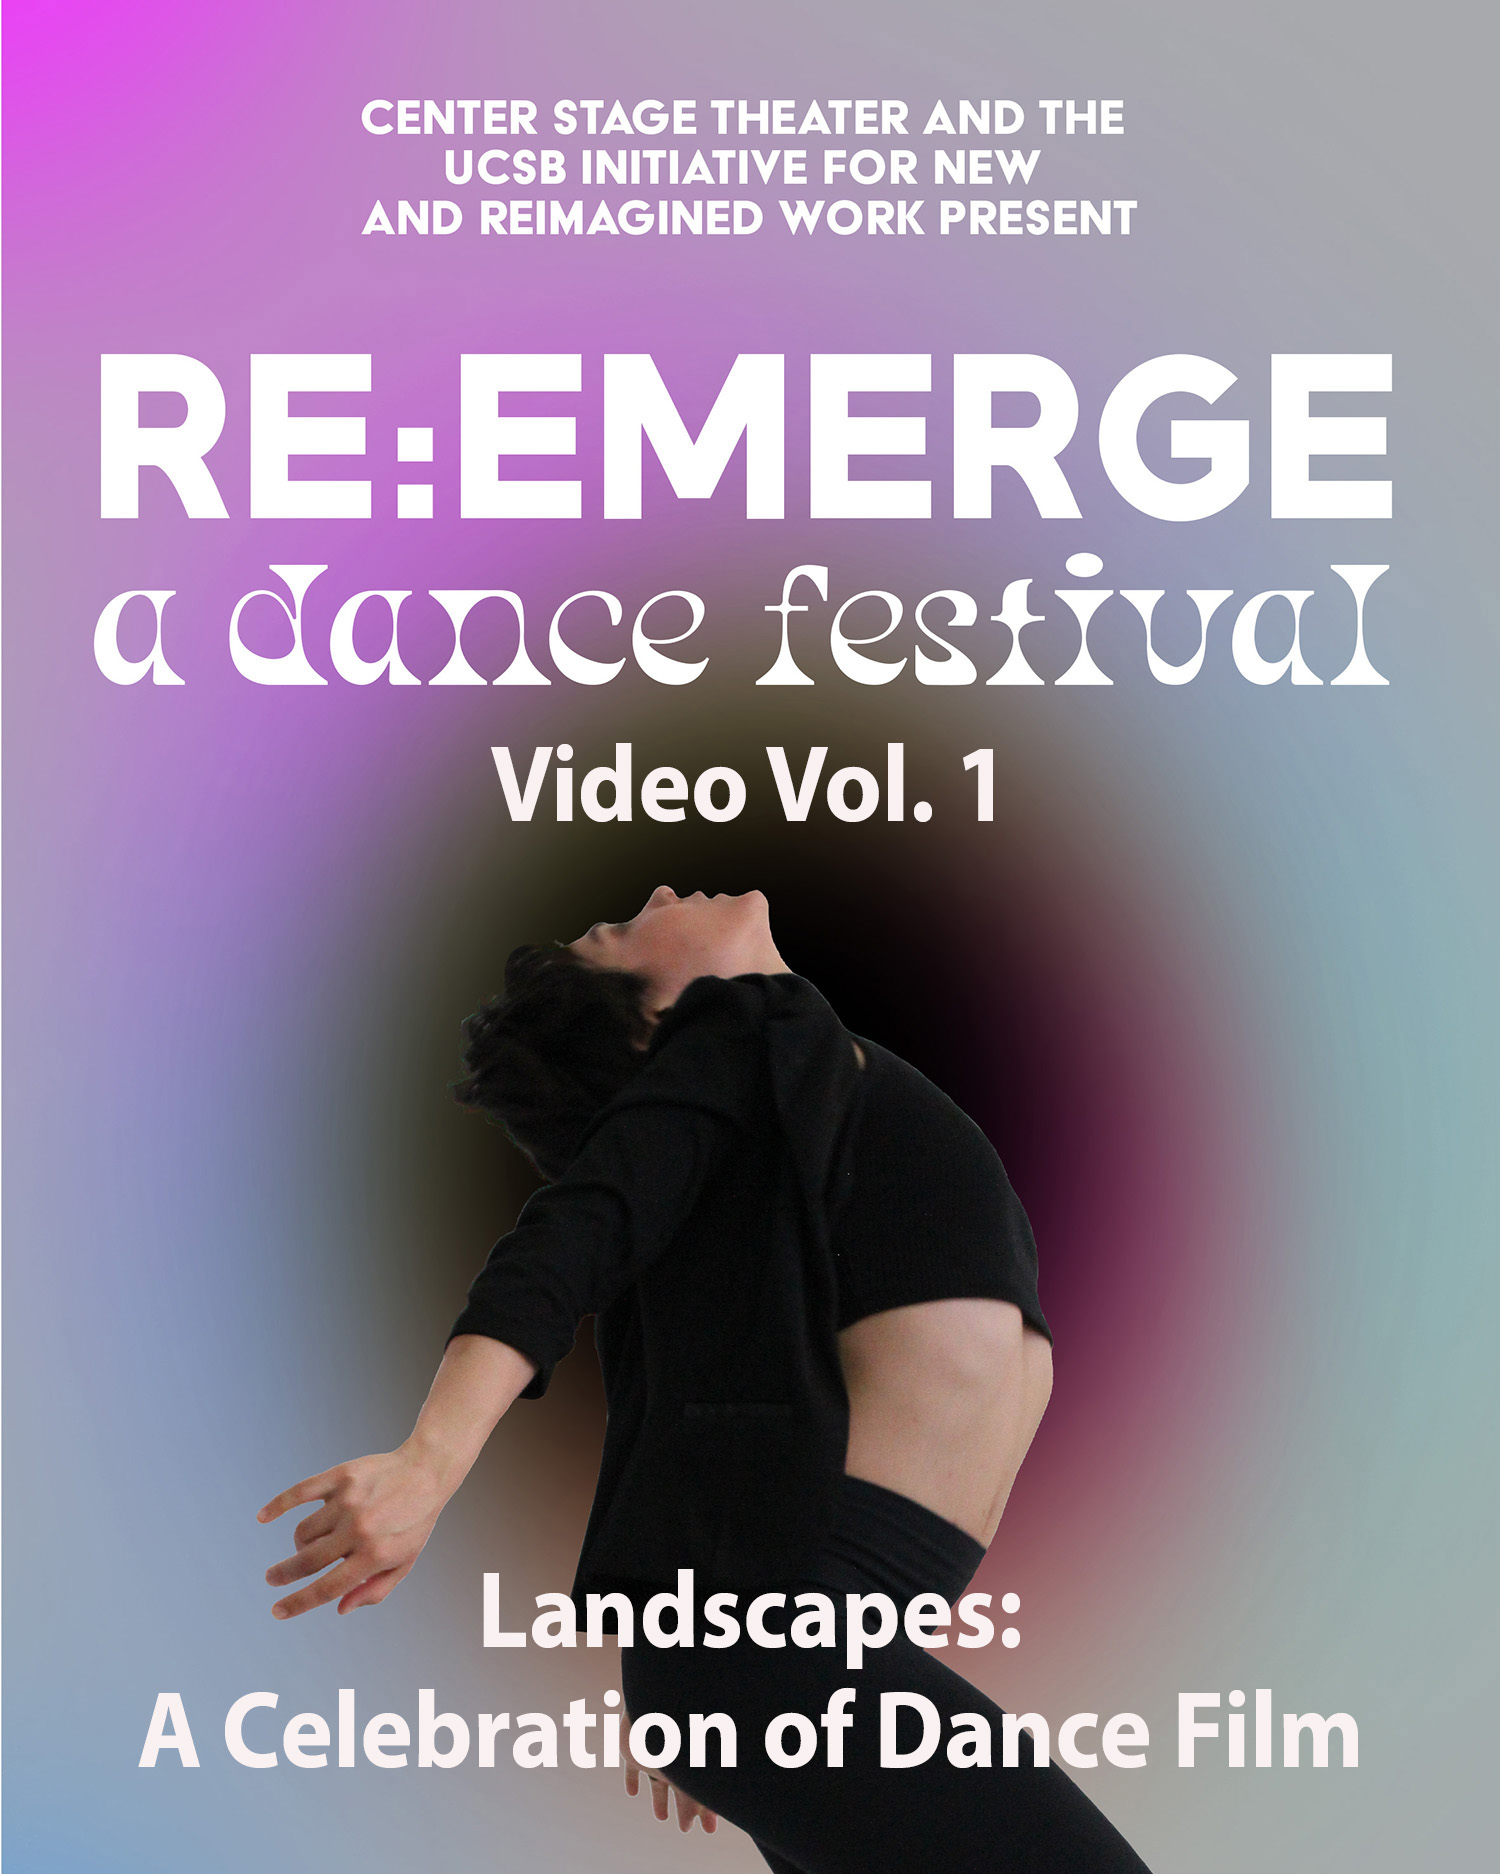 Re:Emerge Festival video Vol 2 - Community Celebration:  An Evening Of Mixed Repertory